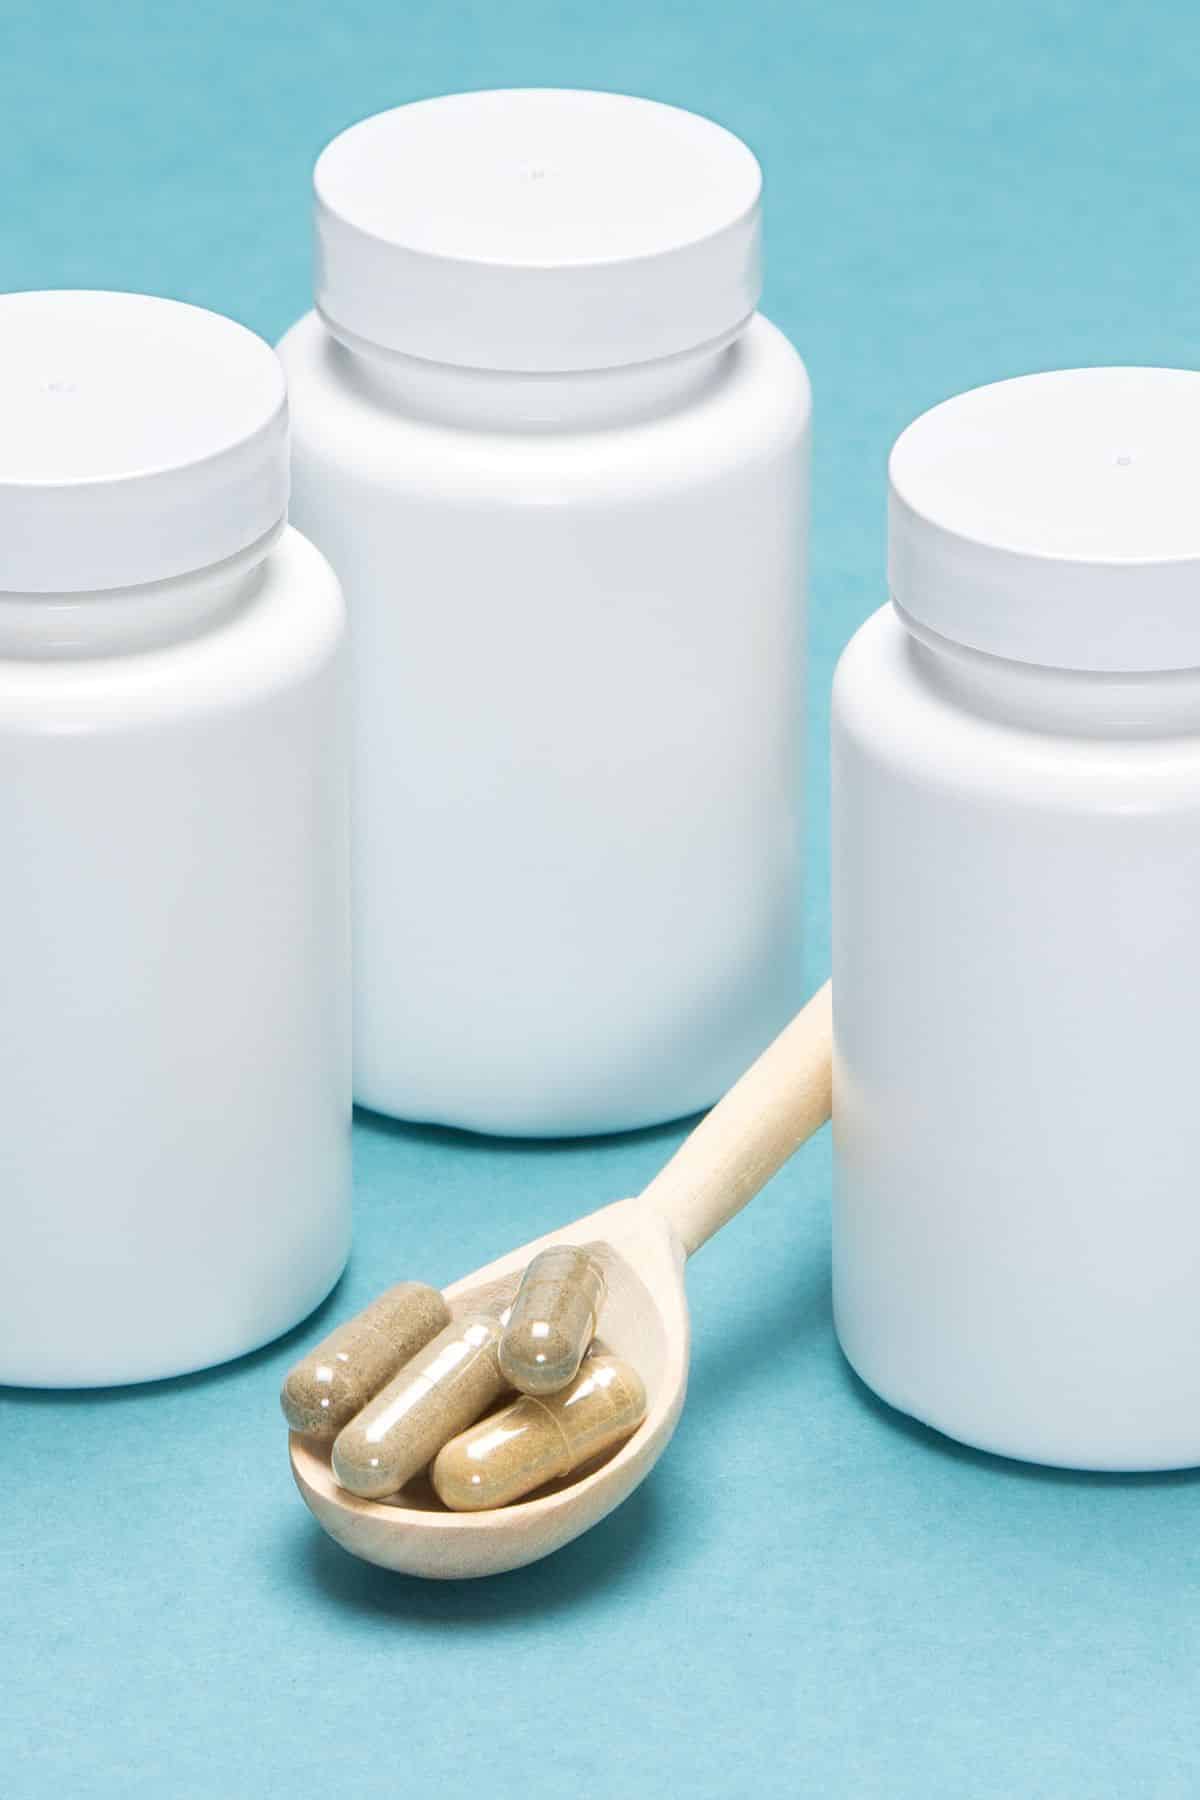 supplement in a spoon on table with containers.